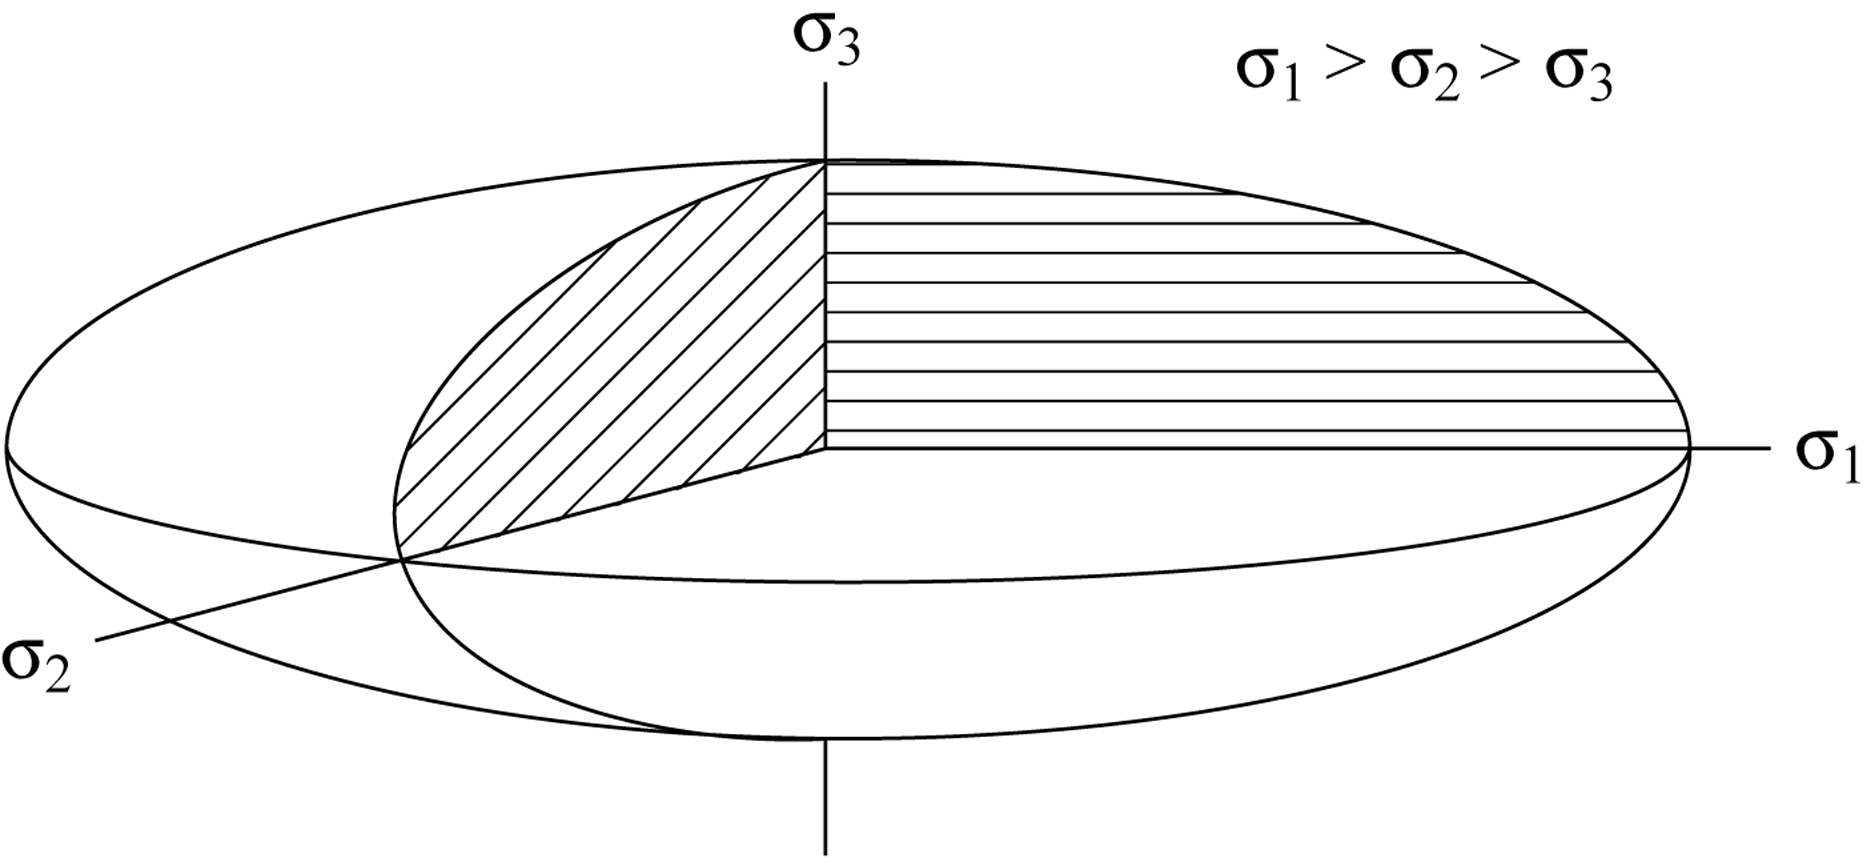 Fig 3.1